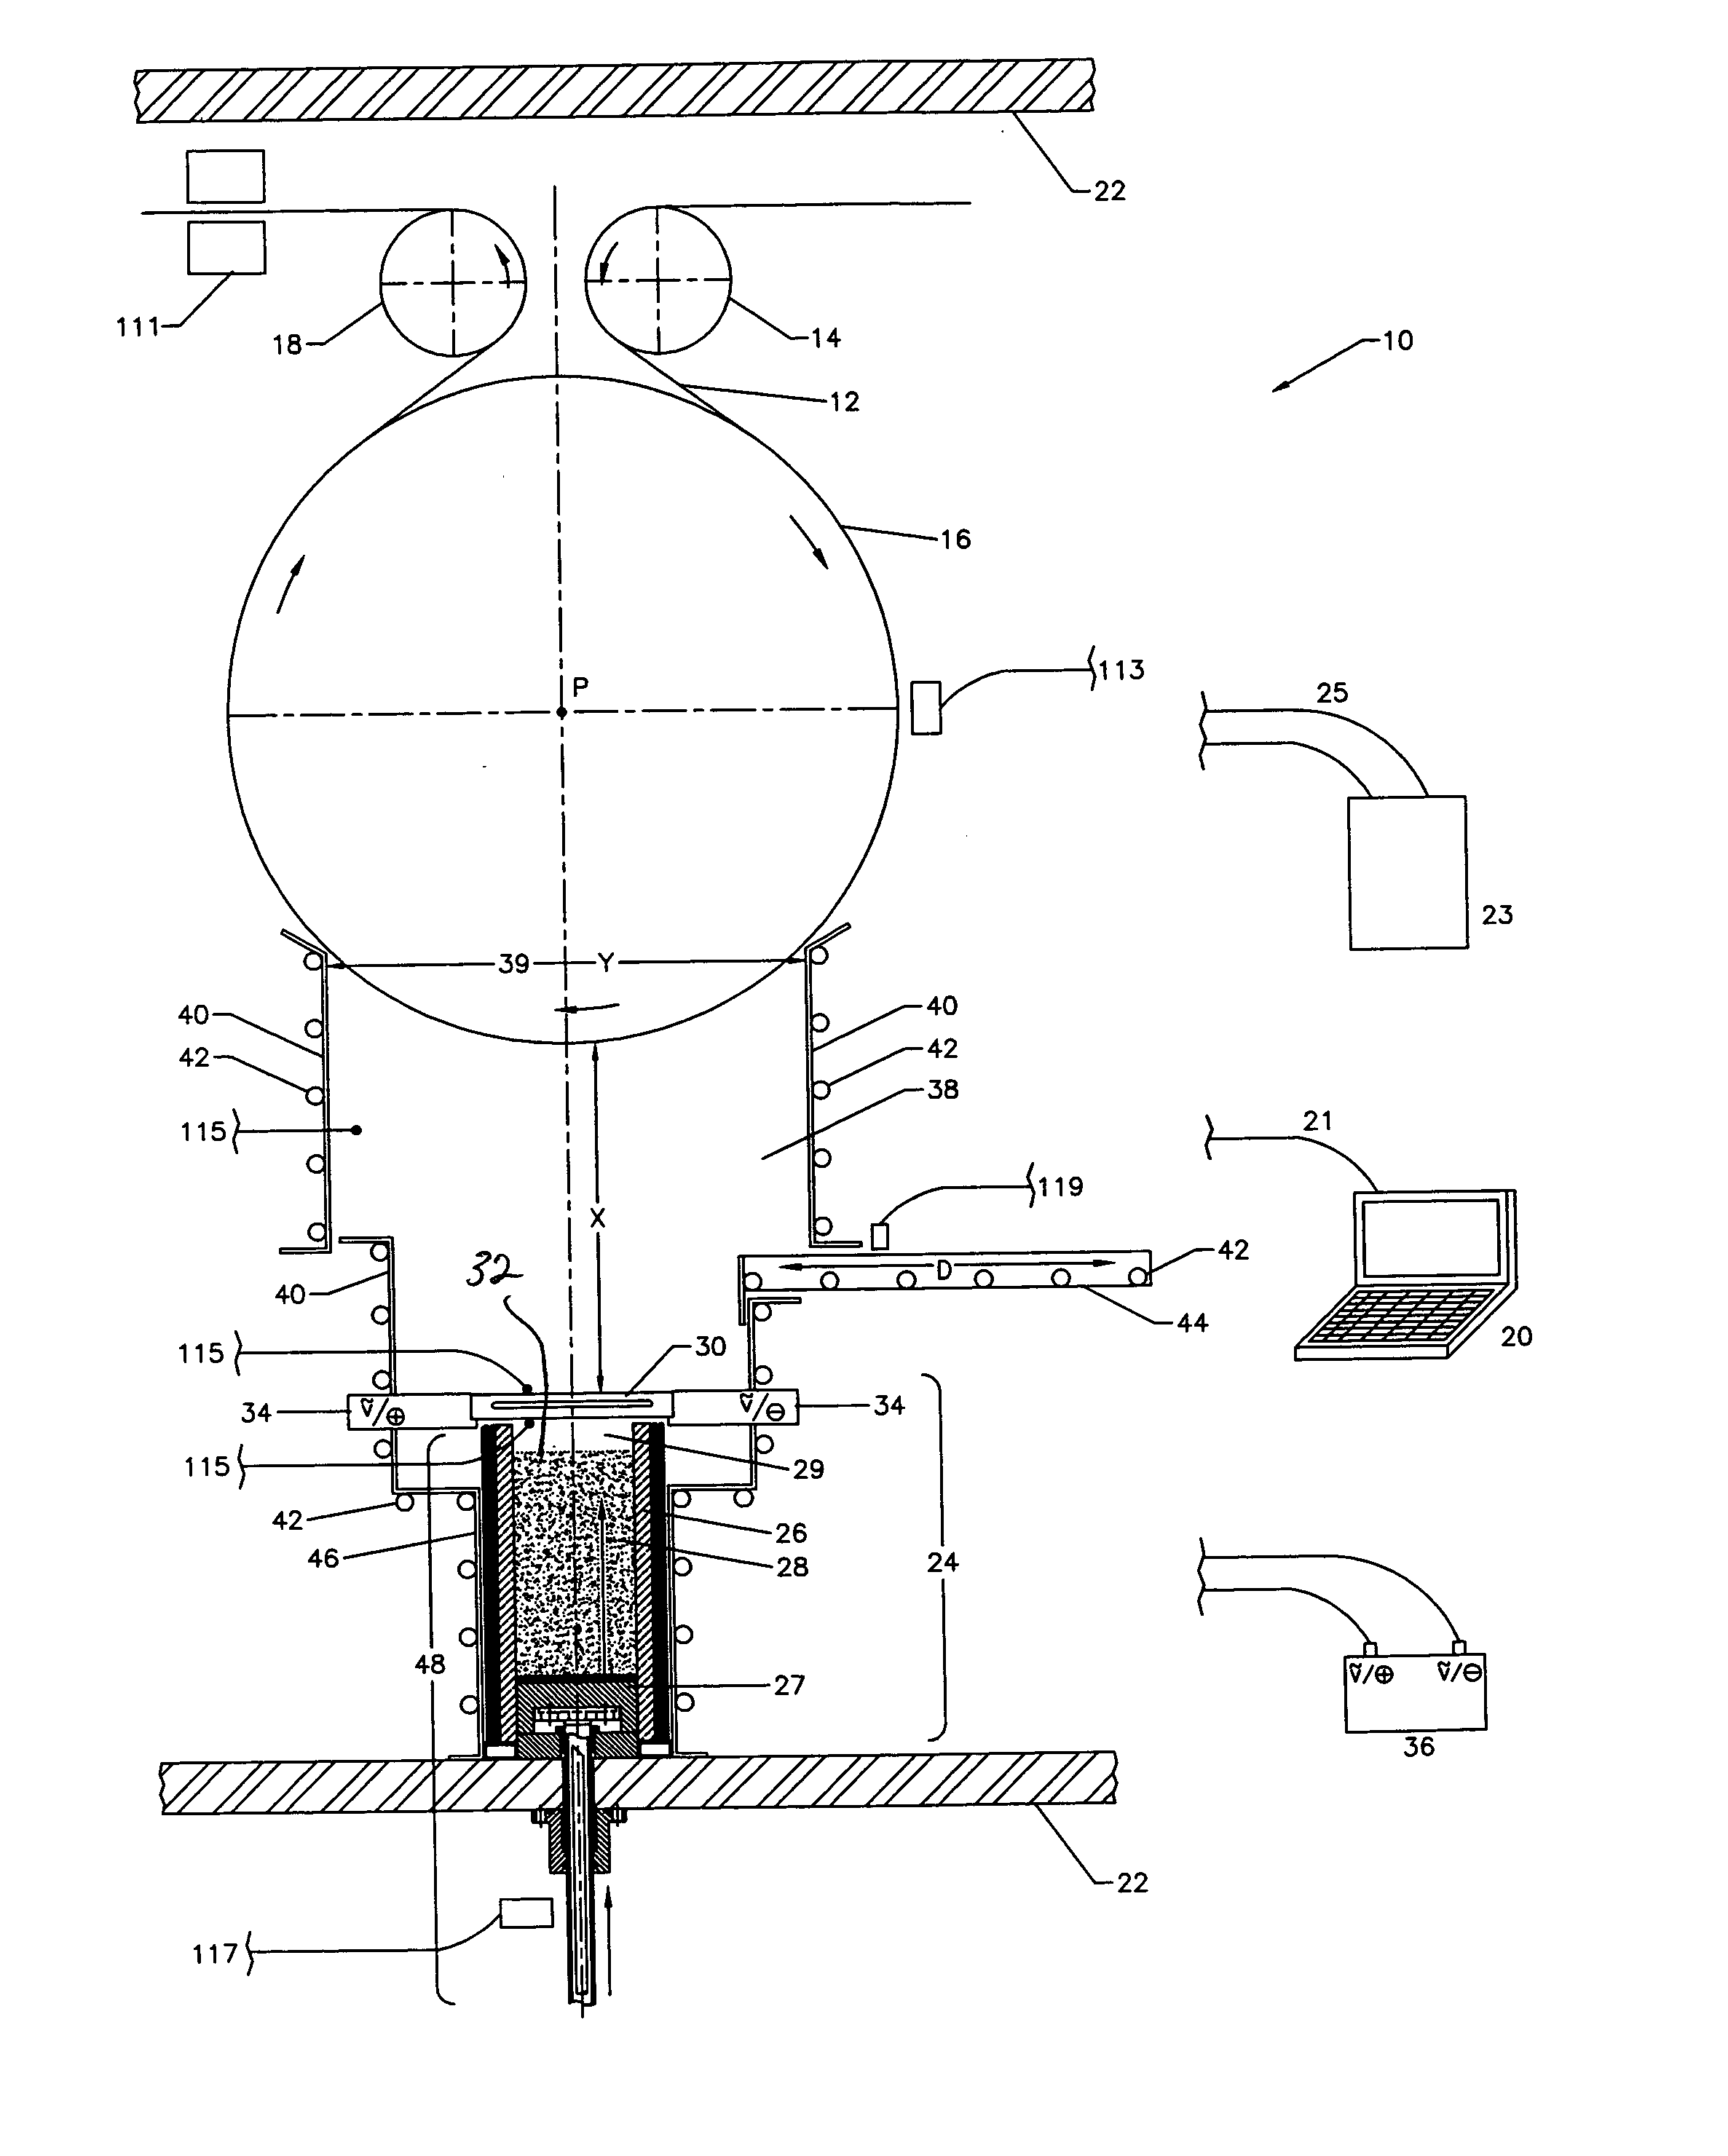 Multi-layered radiant thermal evaporator and method of use